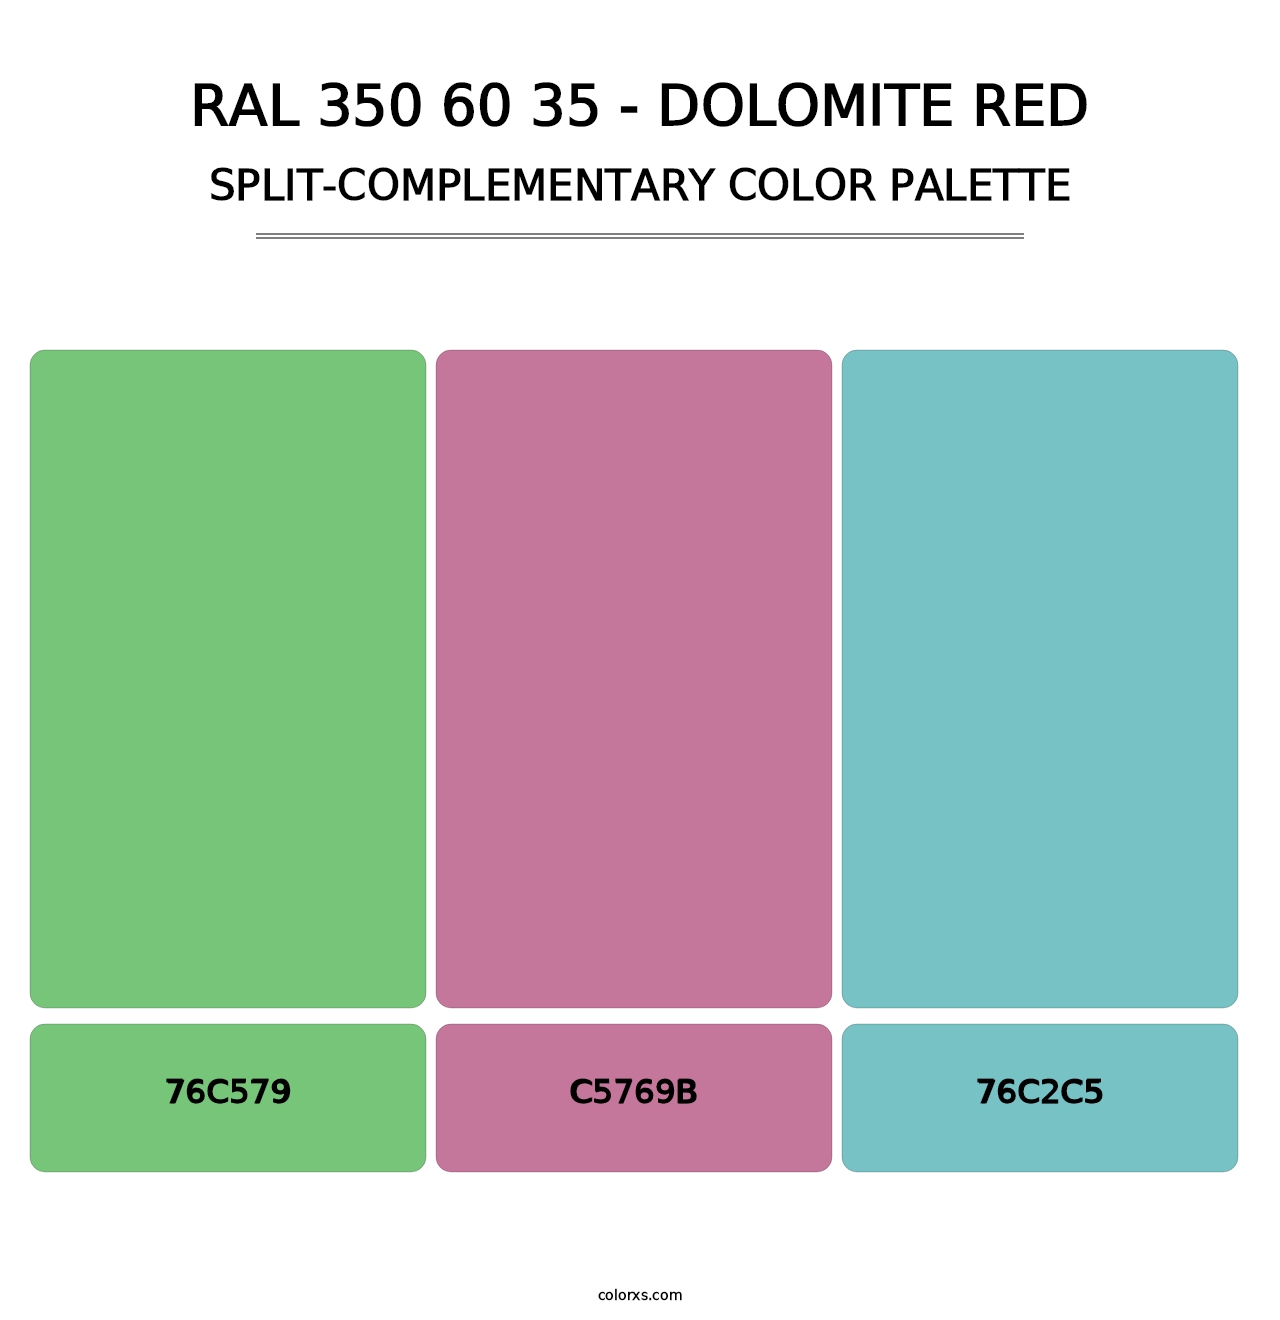 RAL 350 60 35 - Dolomite Red - Split-Complementary Color Palette